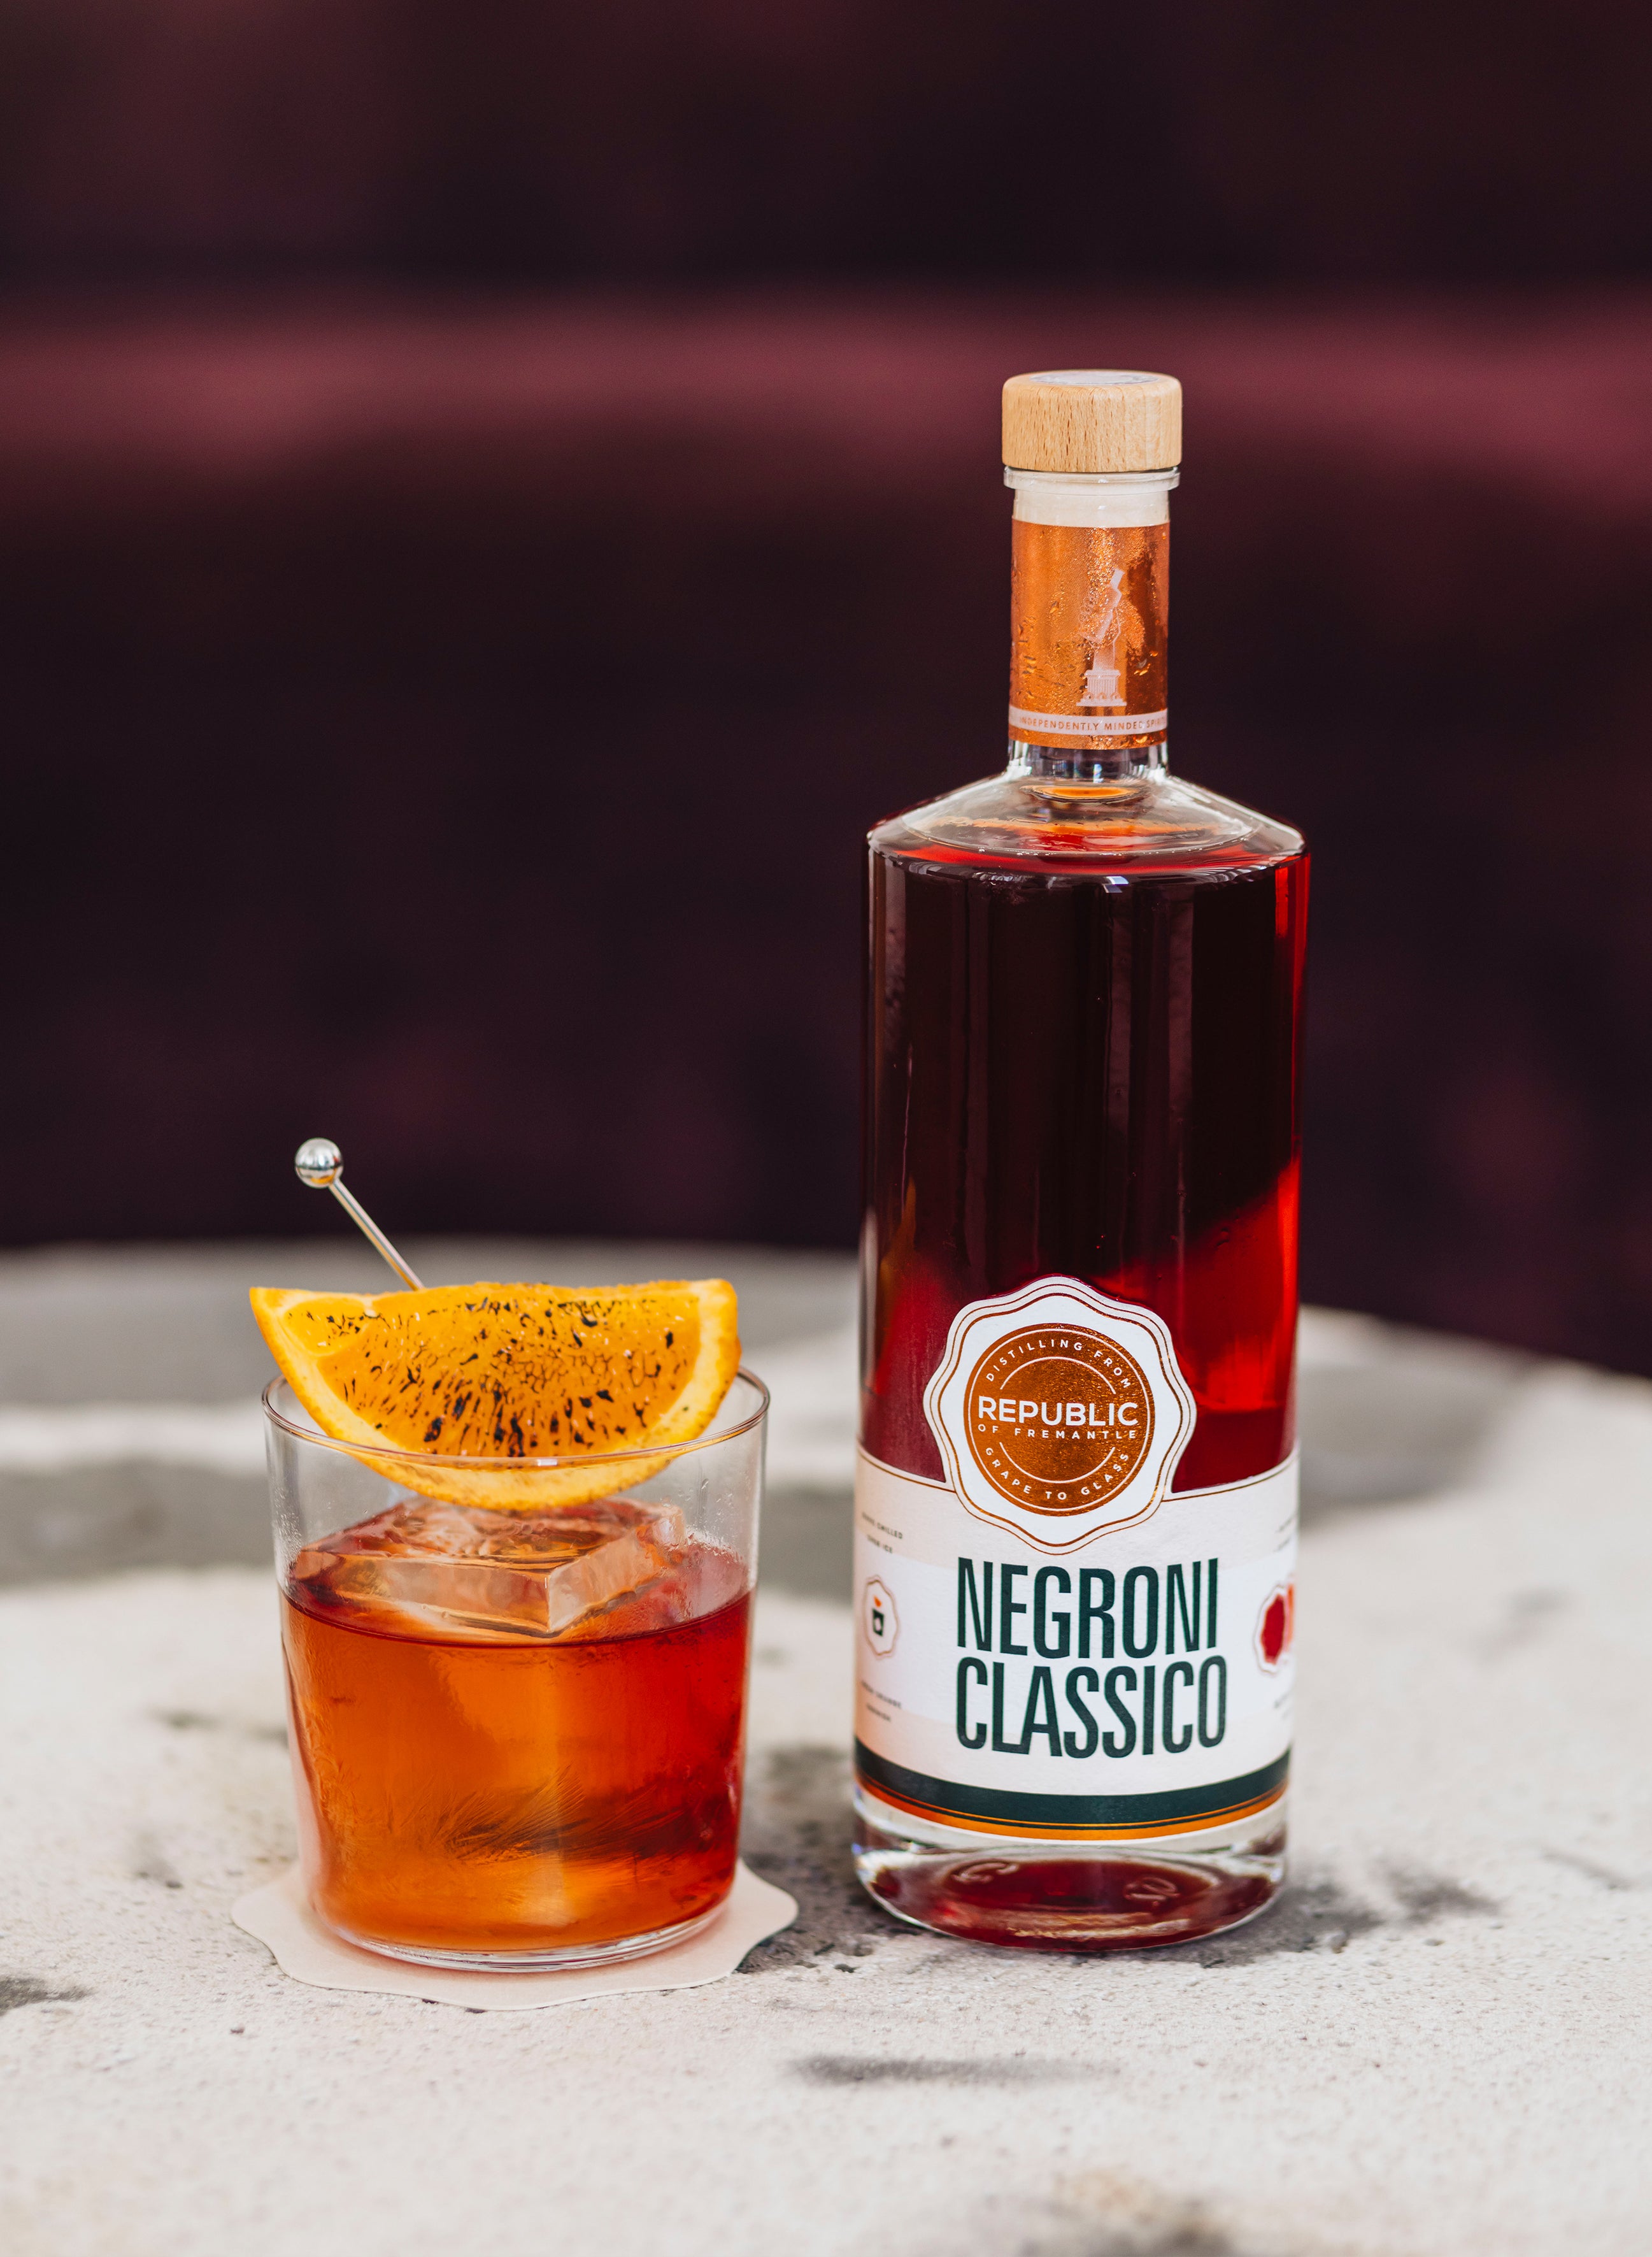 Negroni Classico Bottled Cocktail